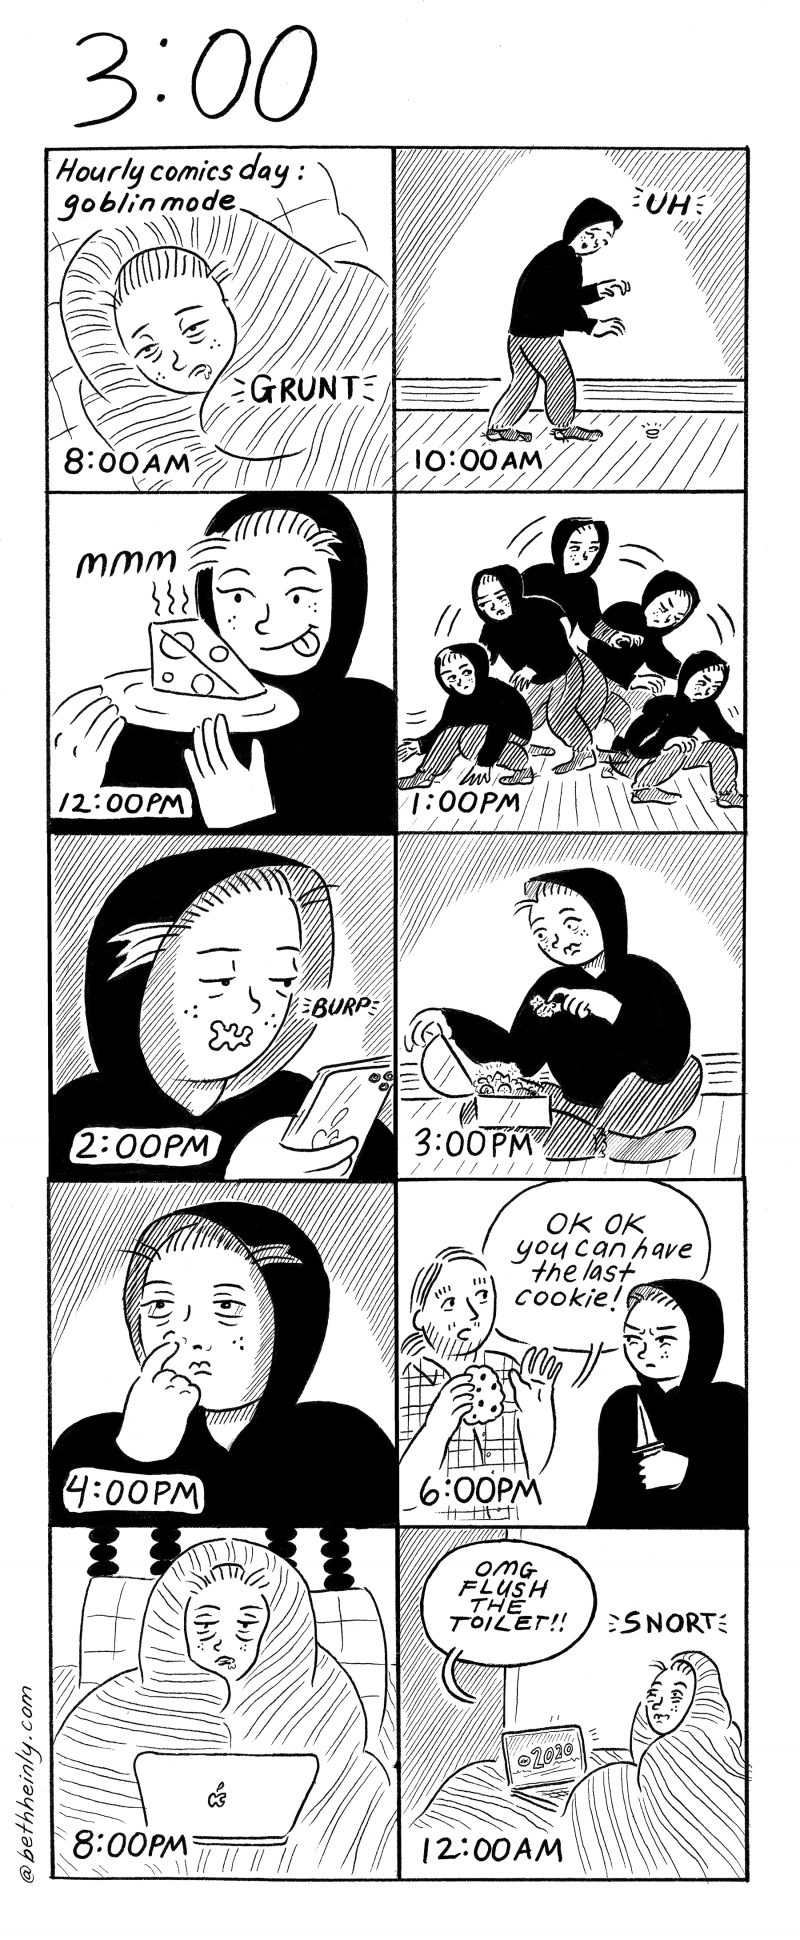 Black and white comic in ten panels tells the hourly activities of one person on one day.